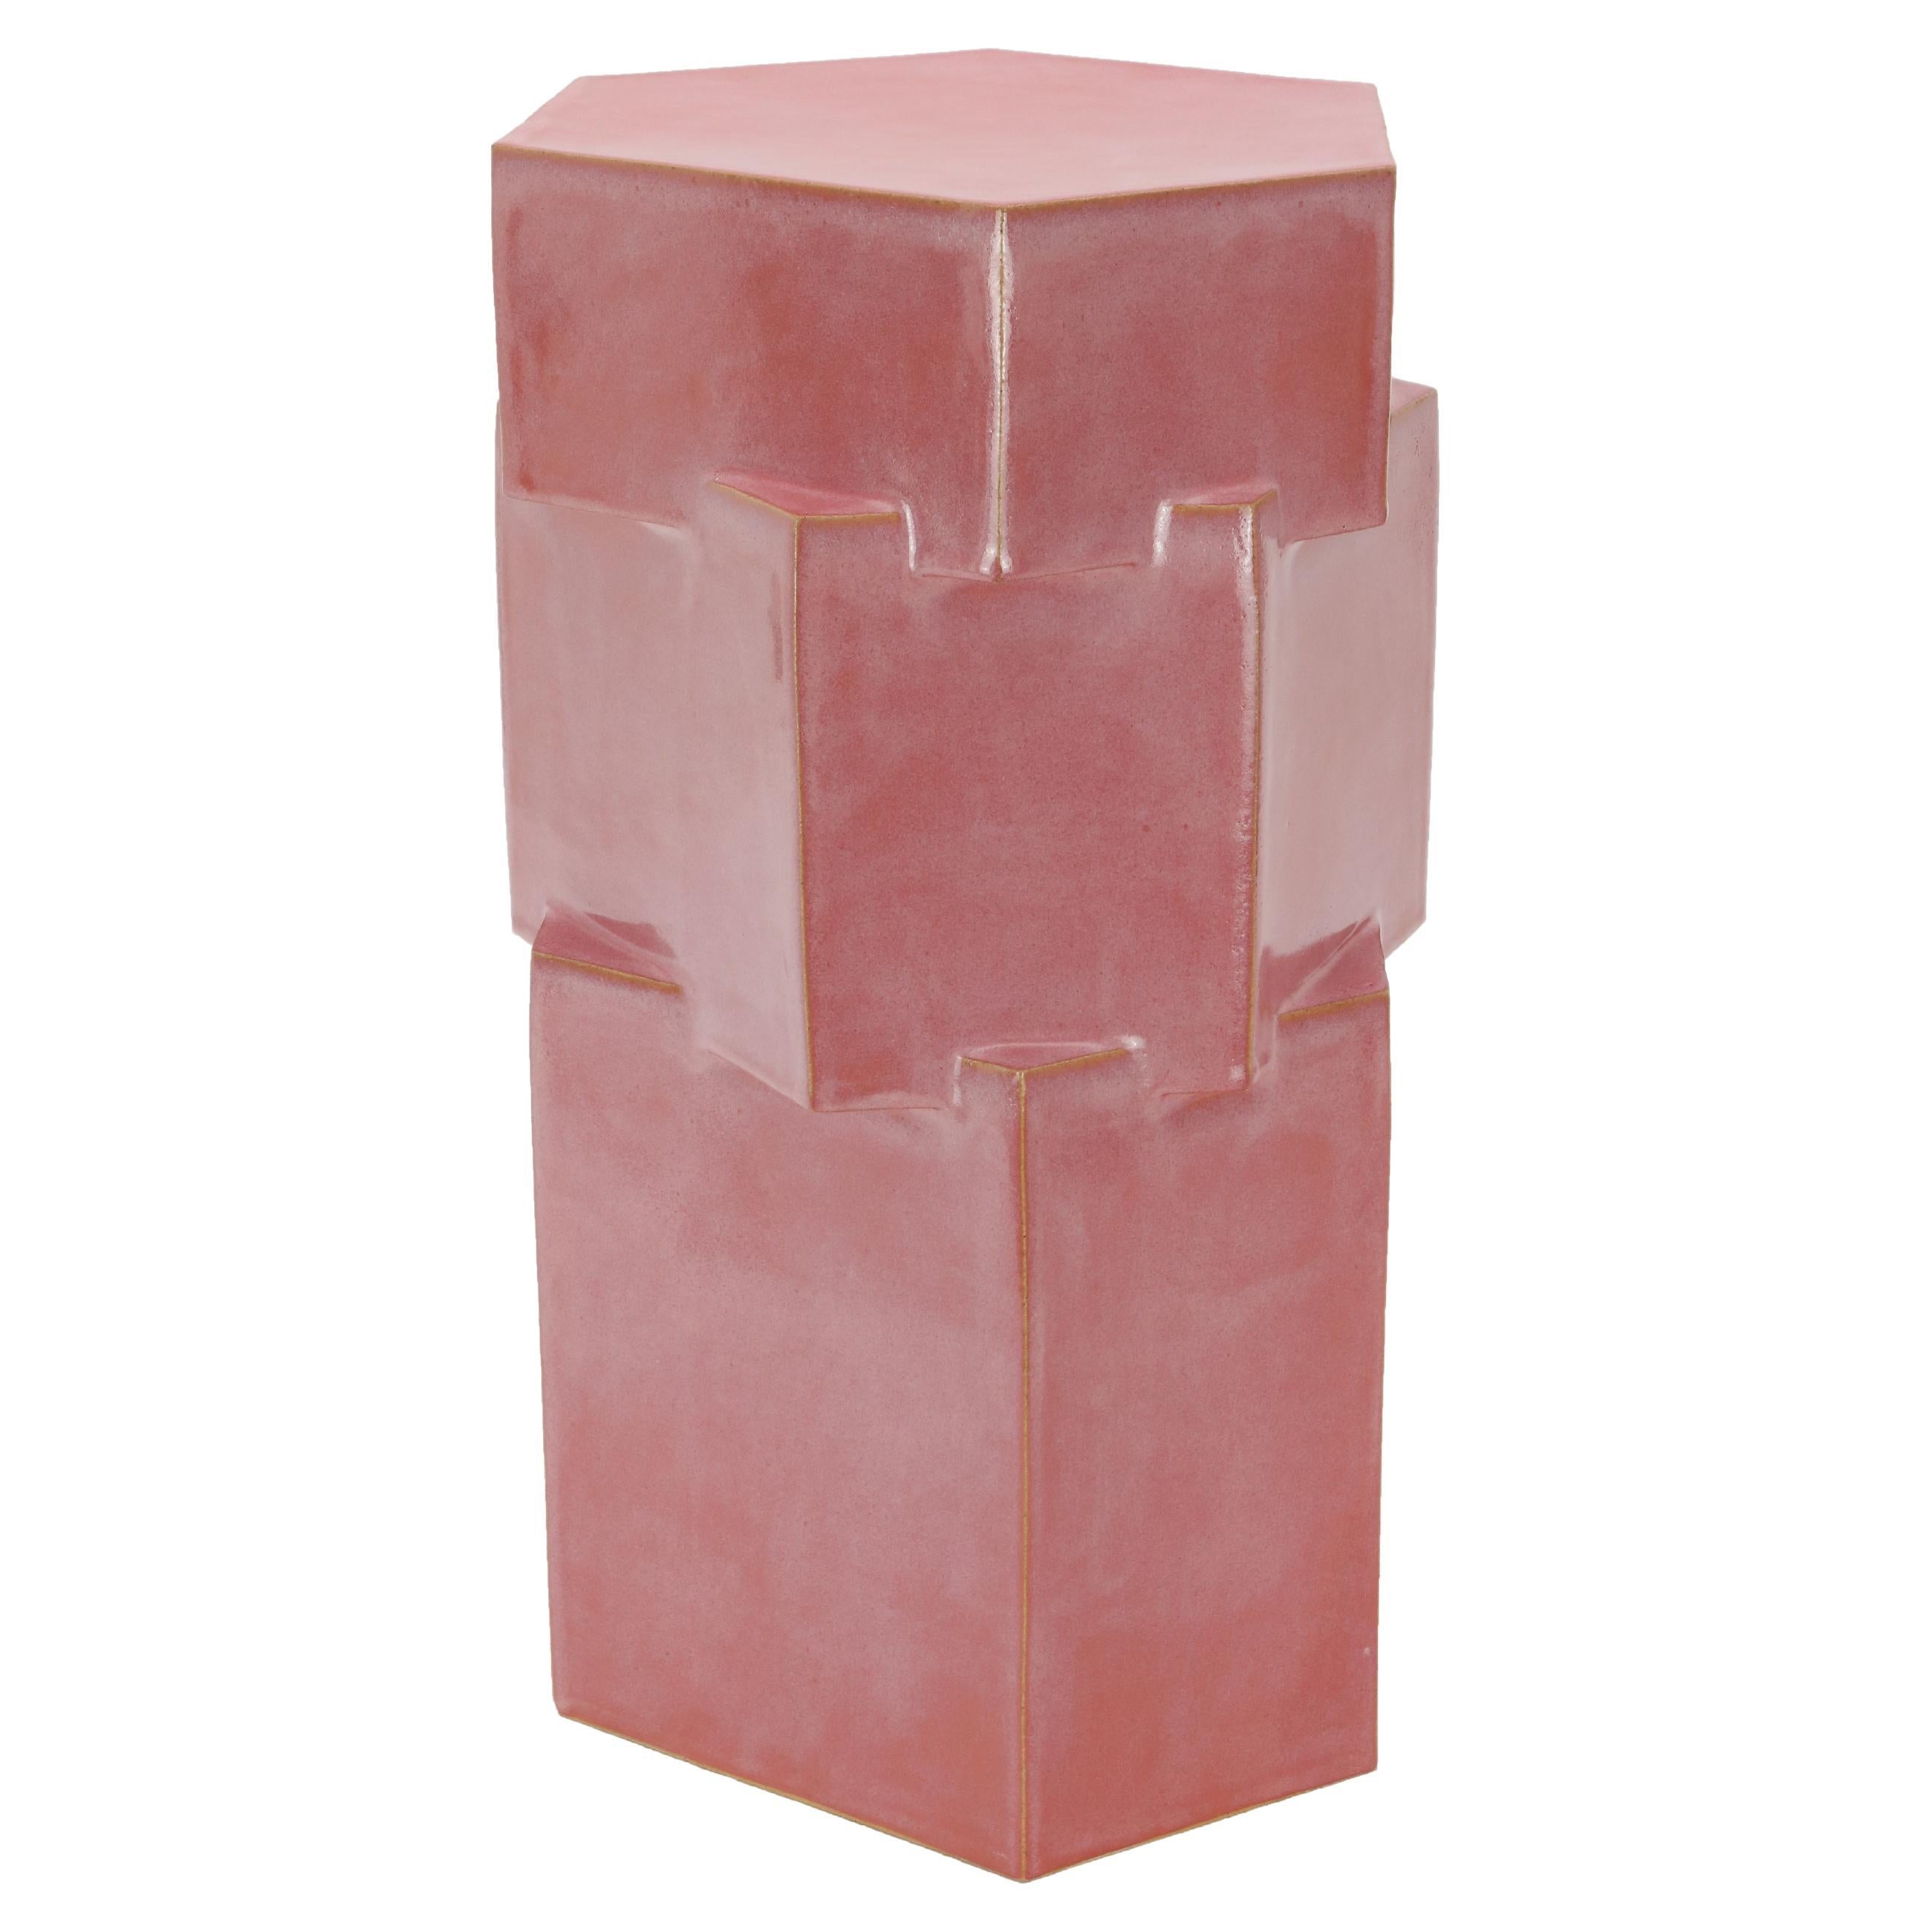 Tall Ceramic Hex Side Table in Sunset Pink by BZIPPY